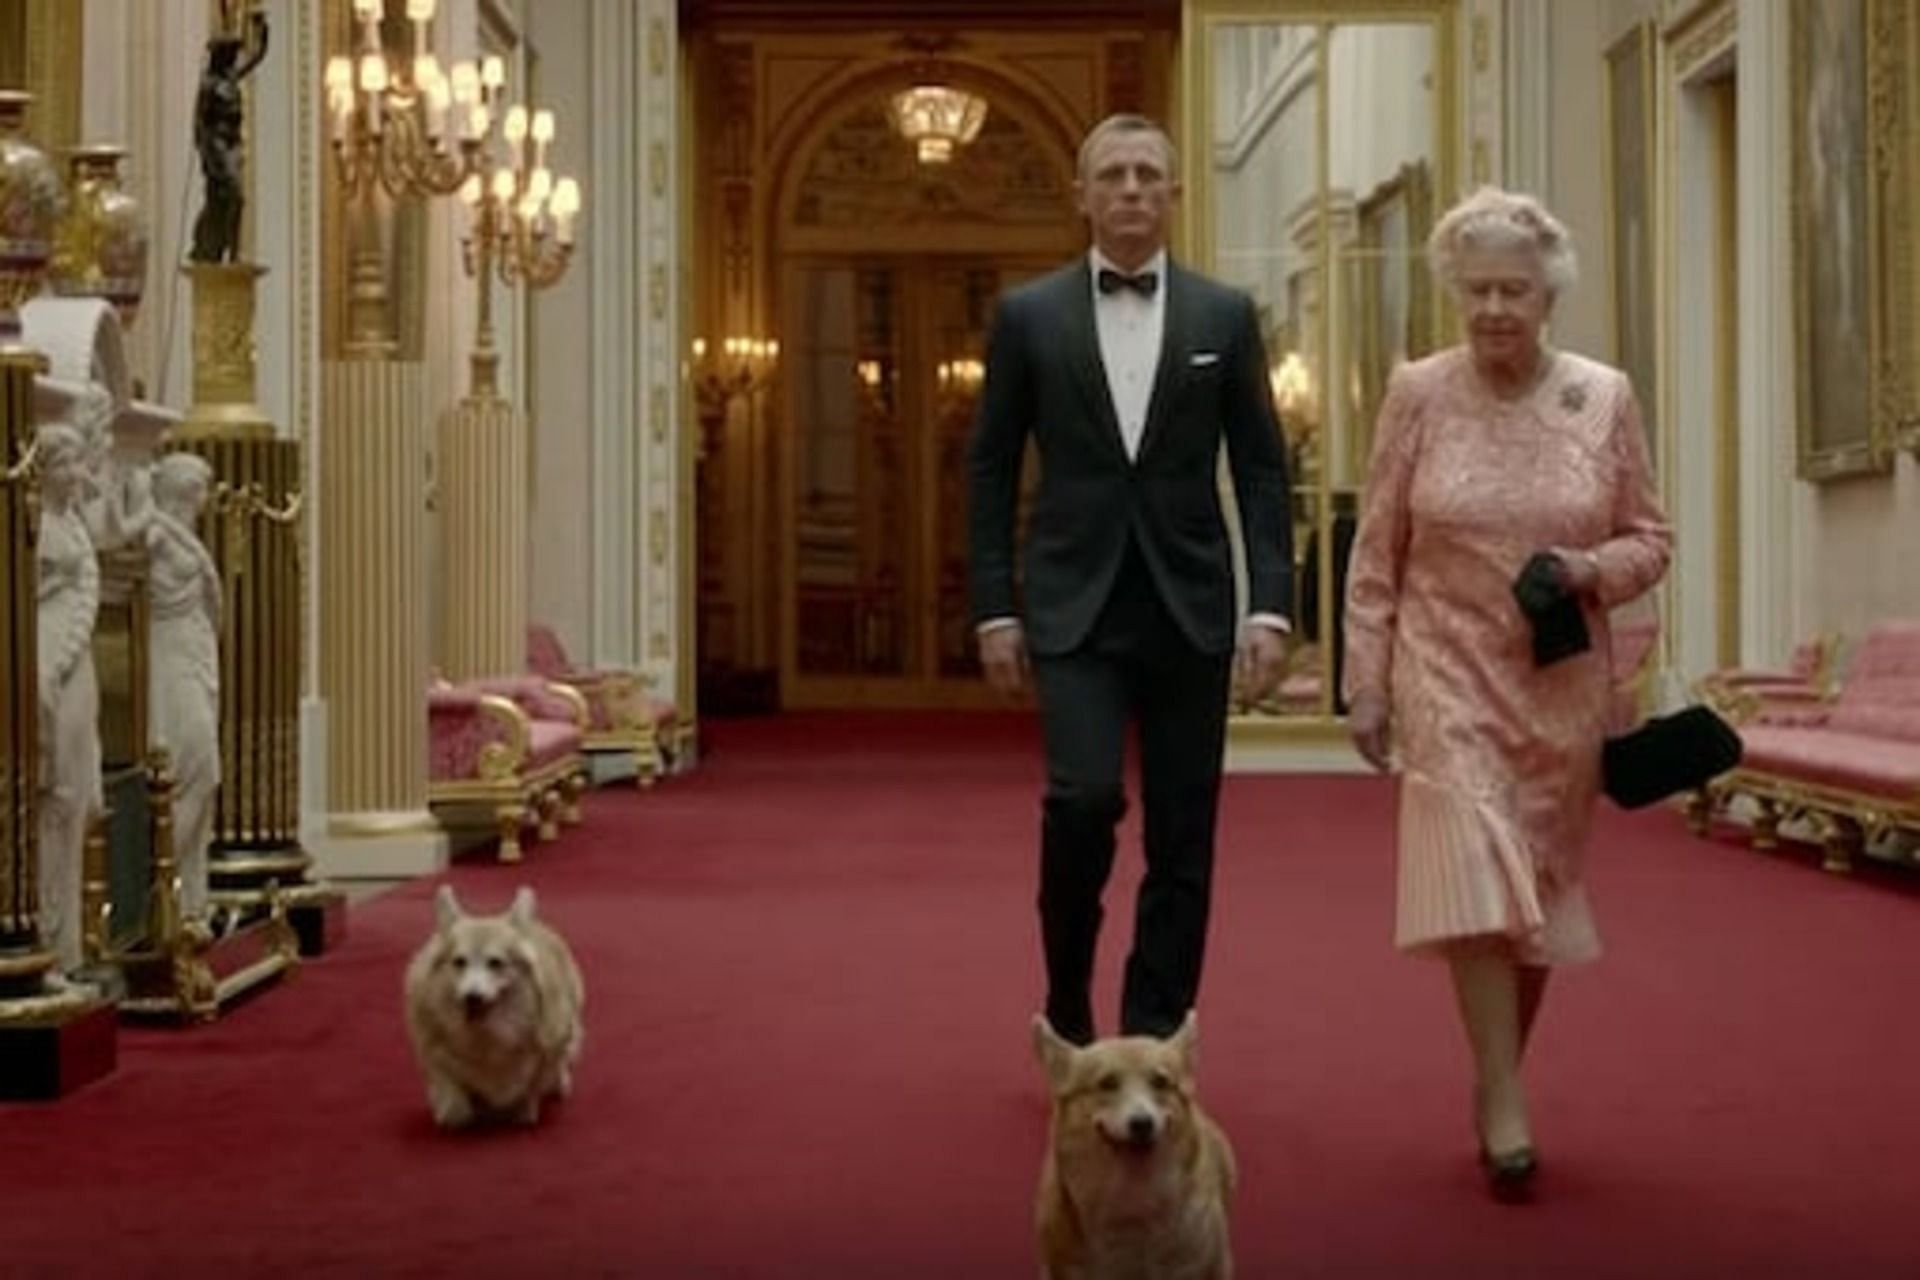 Queen Elizabeth with her corgis in the video for the 2012 London Olympics. (Image via Twitter)